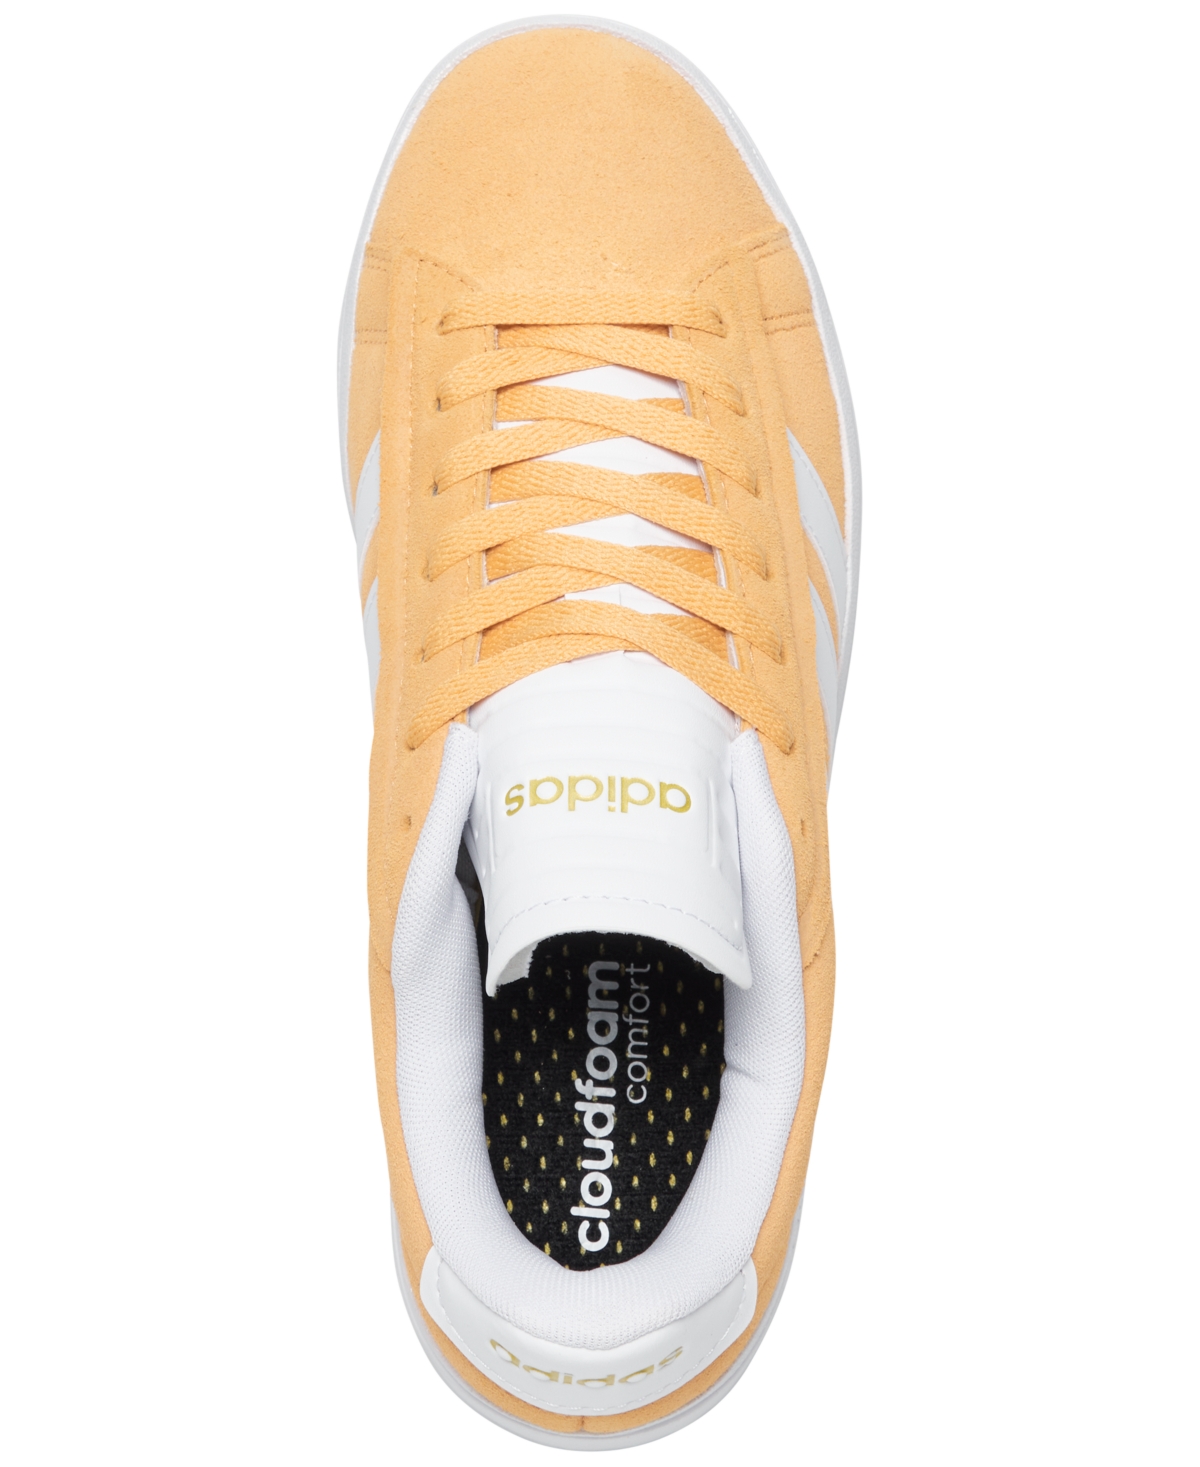 Shop Adidas Originals Women's Grand Court Alpha Cloudfoam Lifestyle Comfort Casual Sneakers From Finish Line In Hazy Orange,white,gold